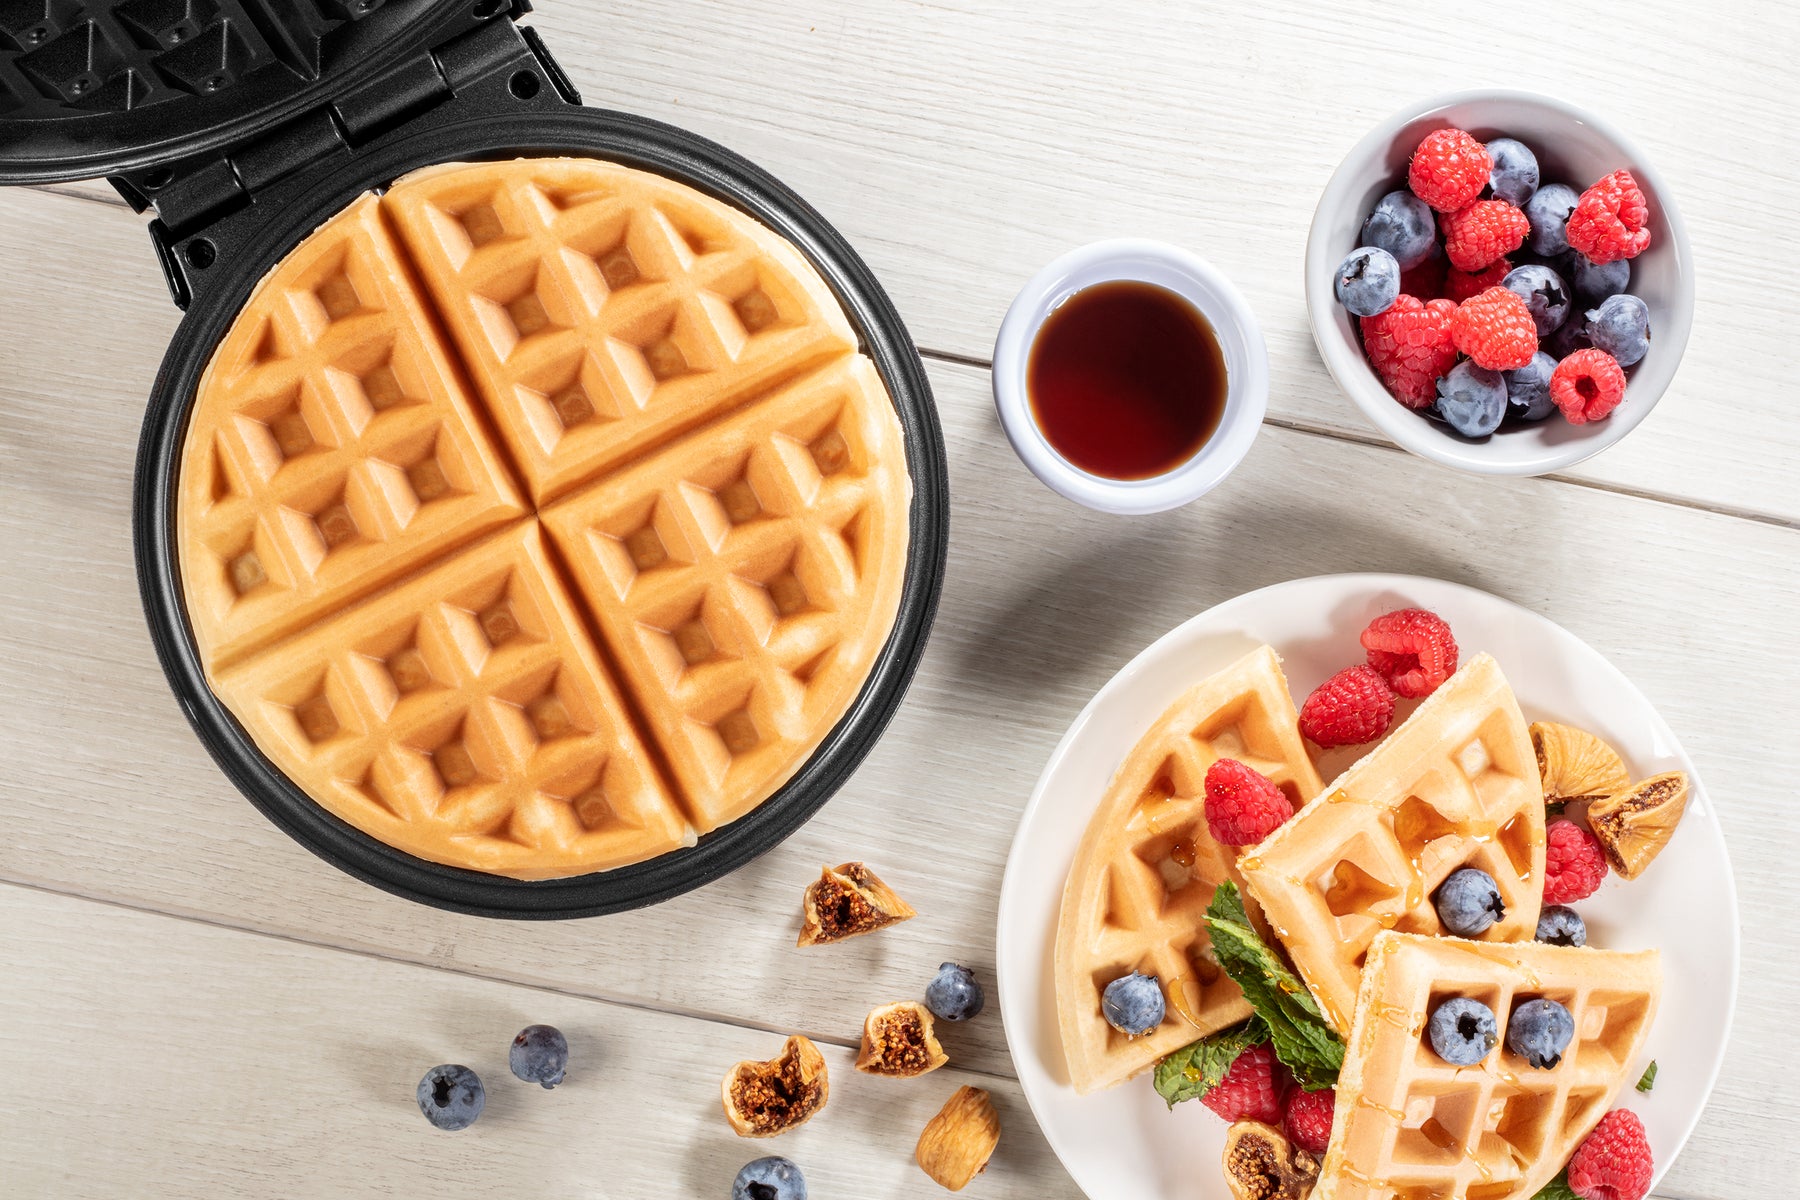 CucinaPro Snowflake 1 waffle Silver Stainless Steel Waffle Maker